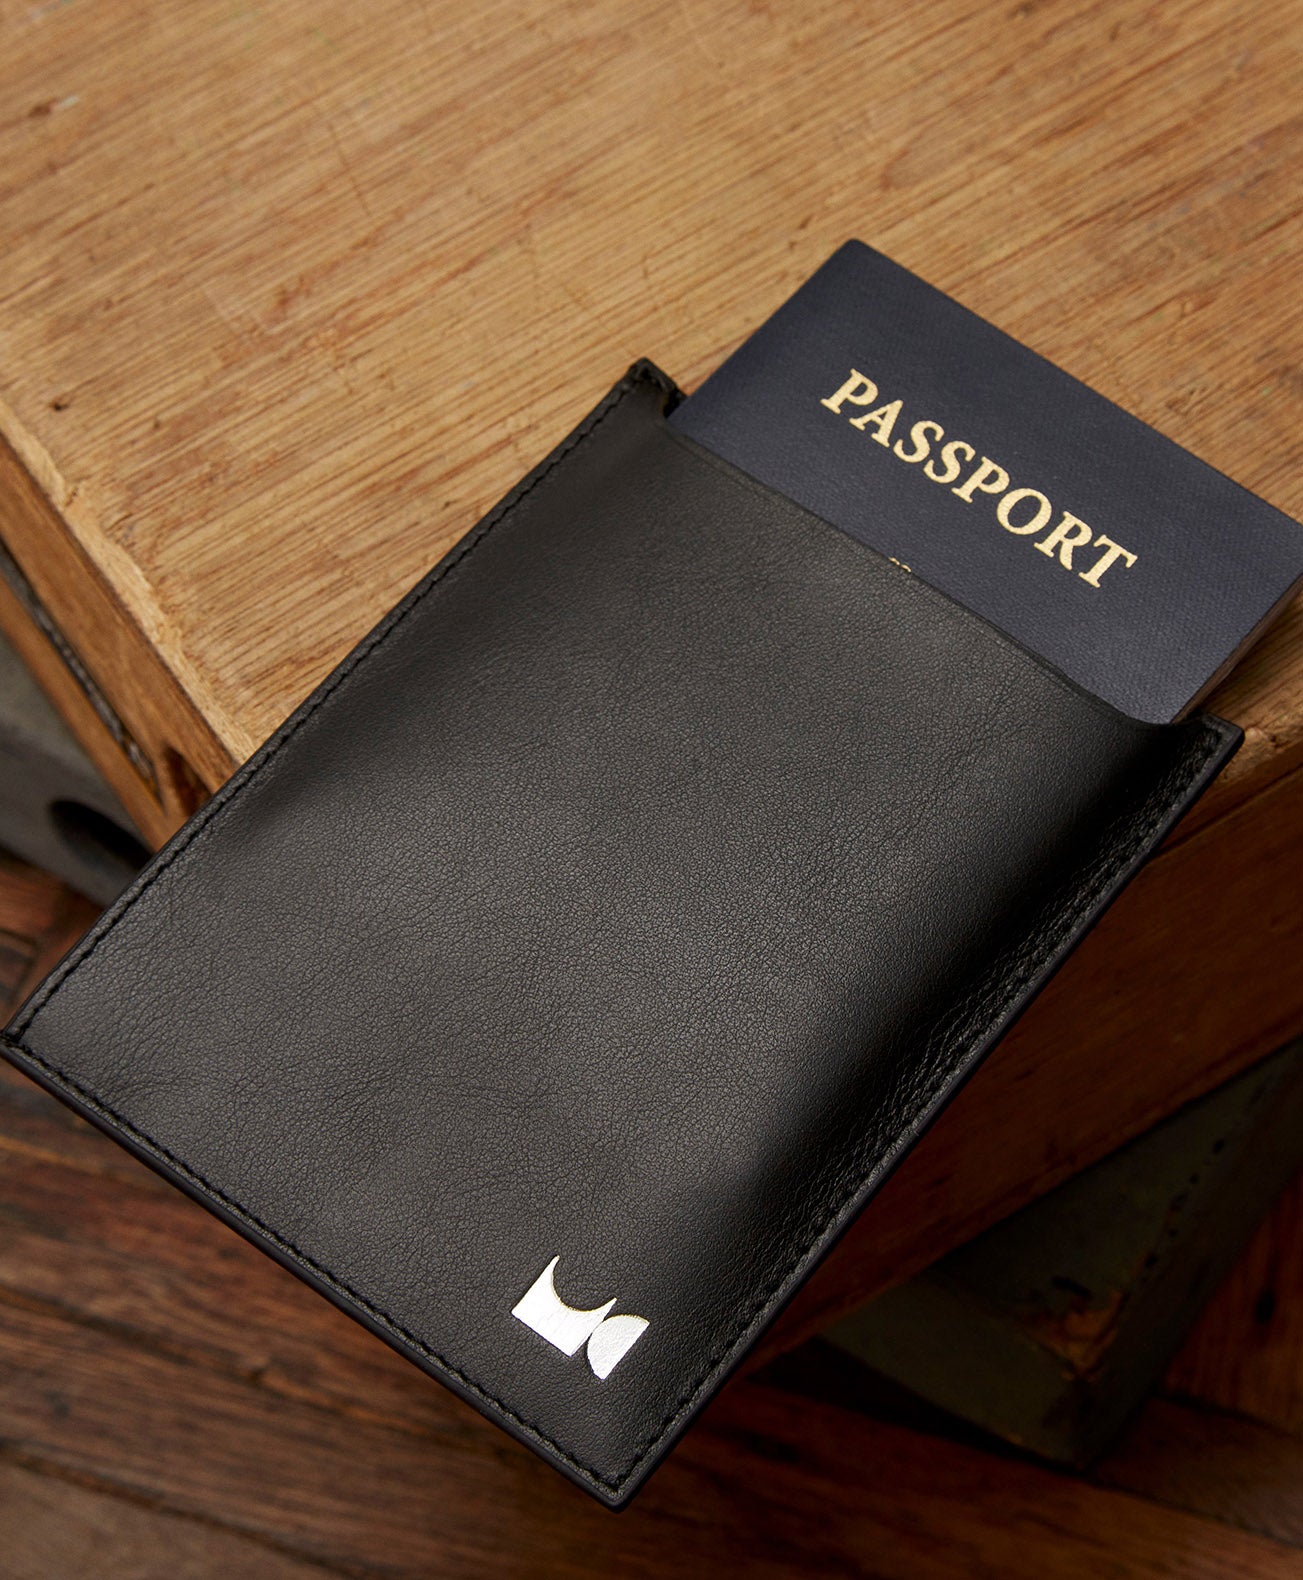 Black leather passport holder sitting in on table holding a passport